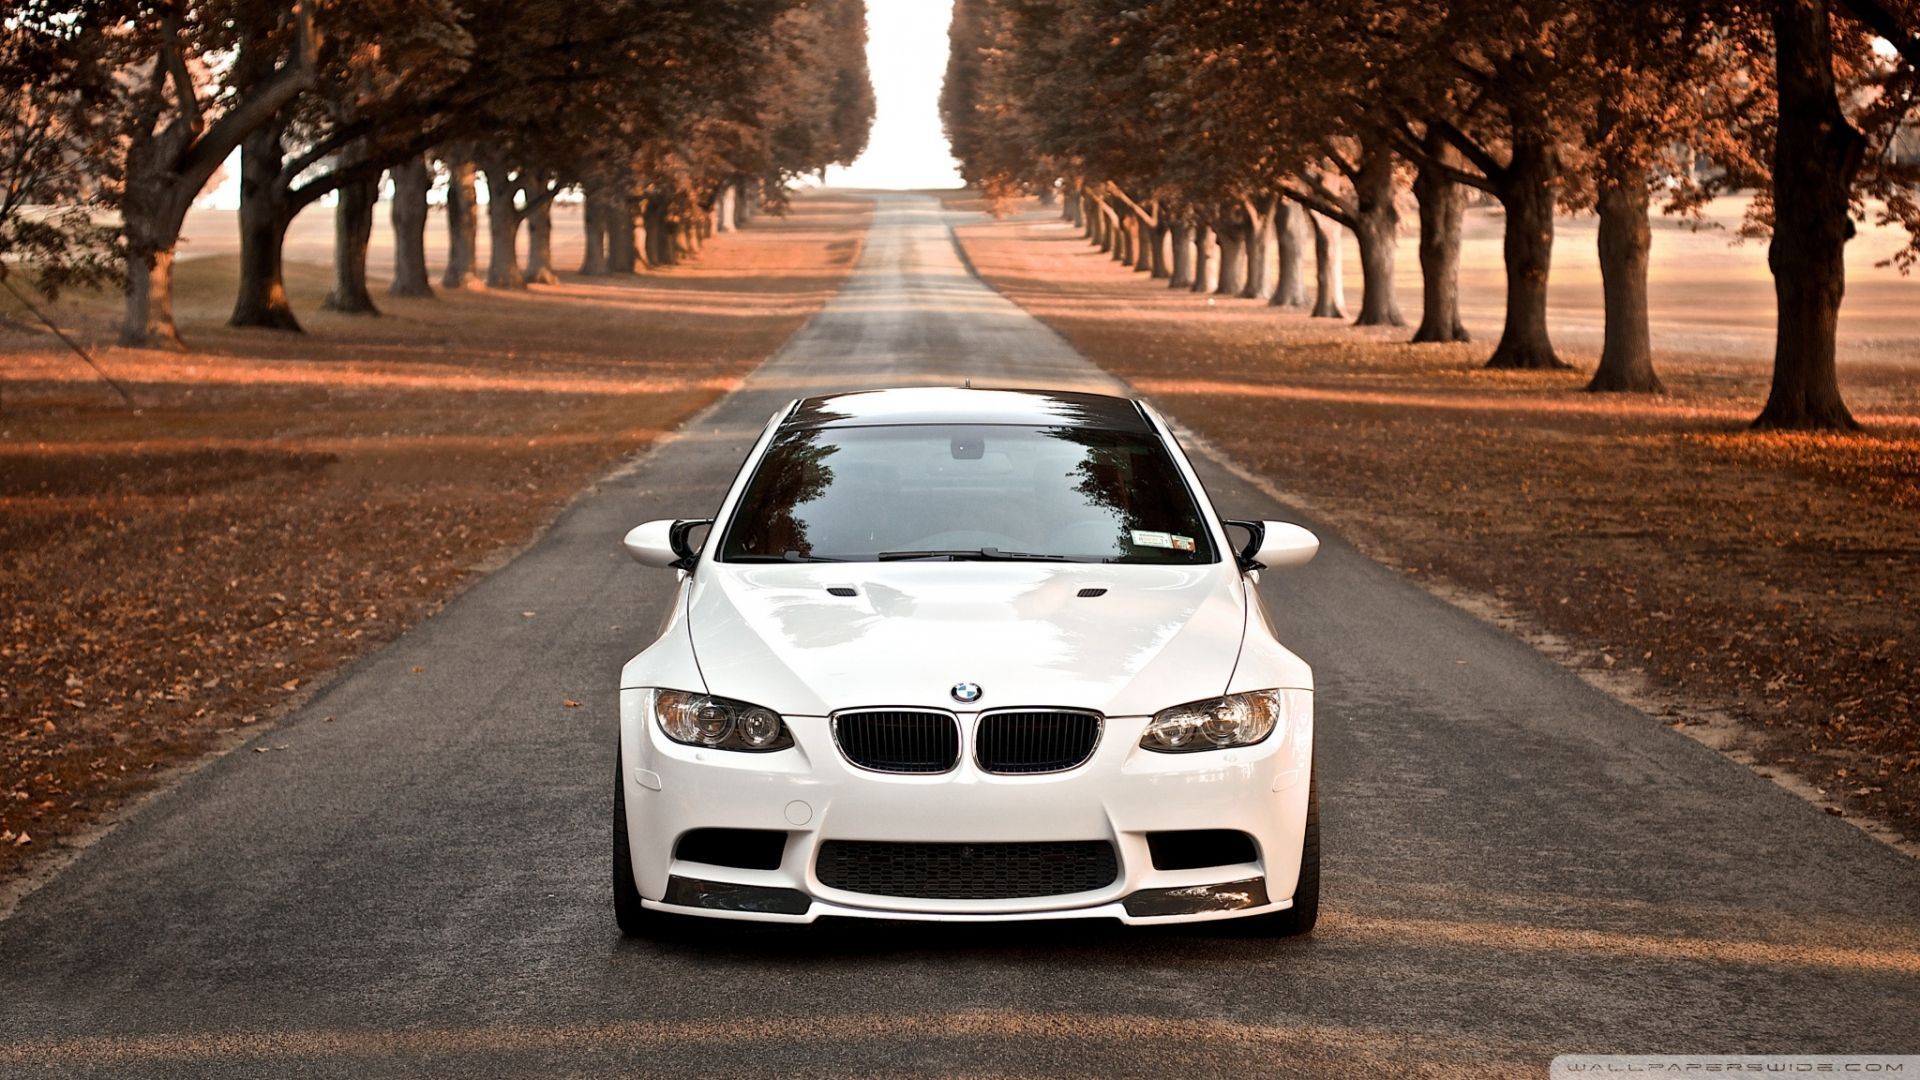 BMW M3 Fall Wallpaper HD is a fantastic HD wallpaper for your PC